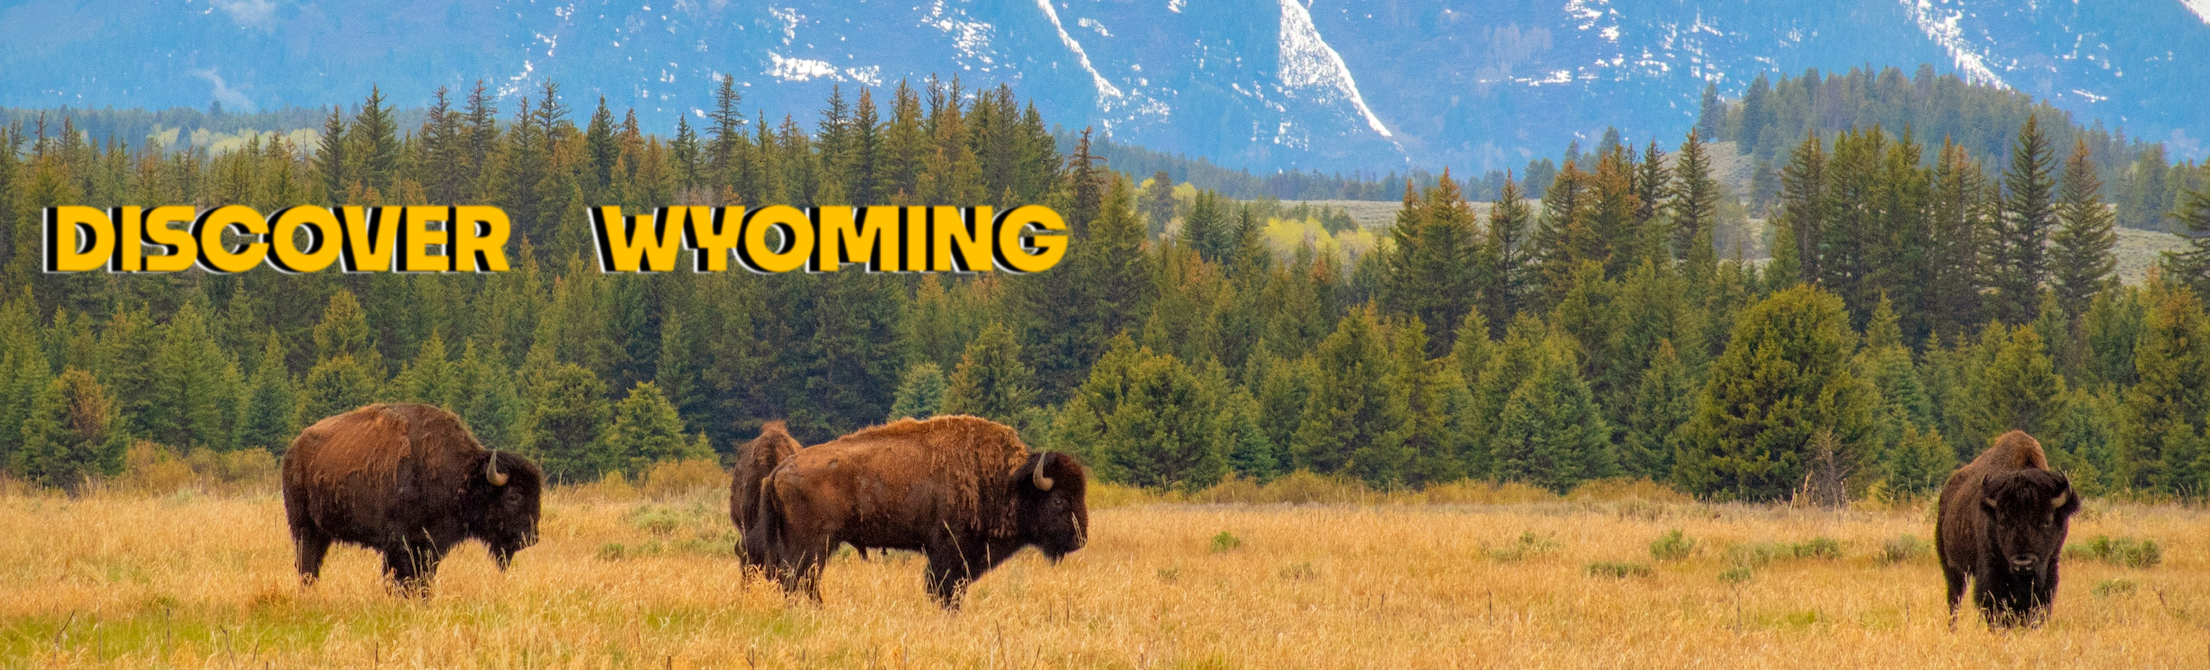 Buffalo in the Tetons with the "Discover Wyoming" logo